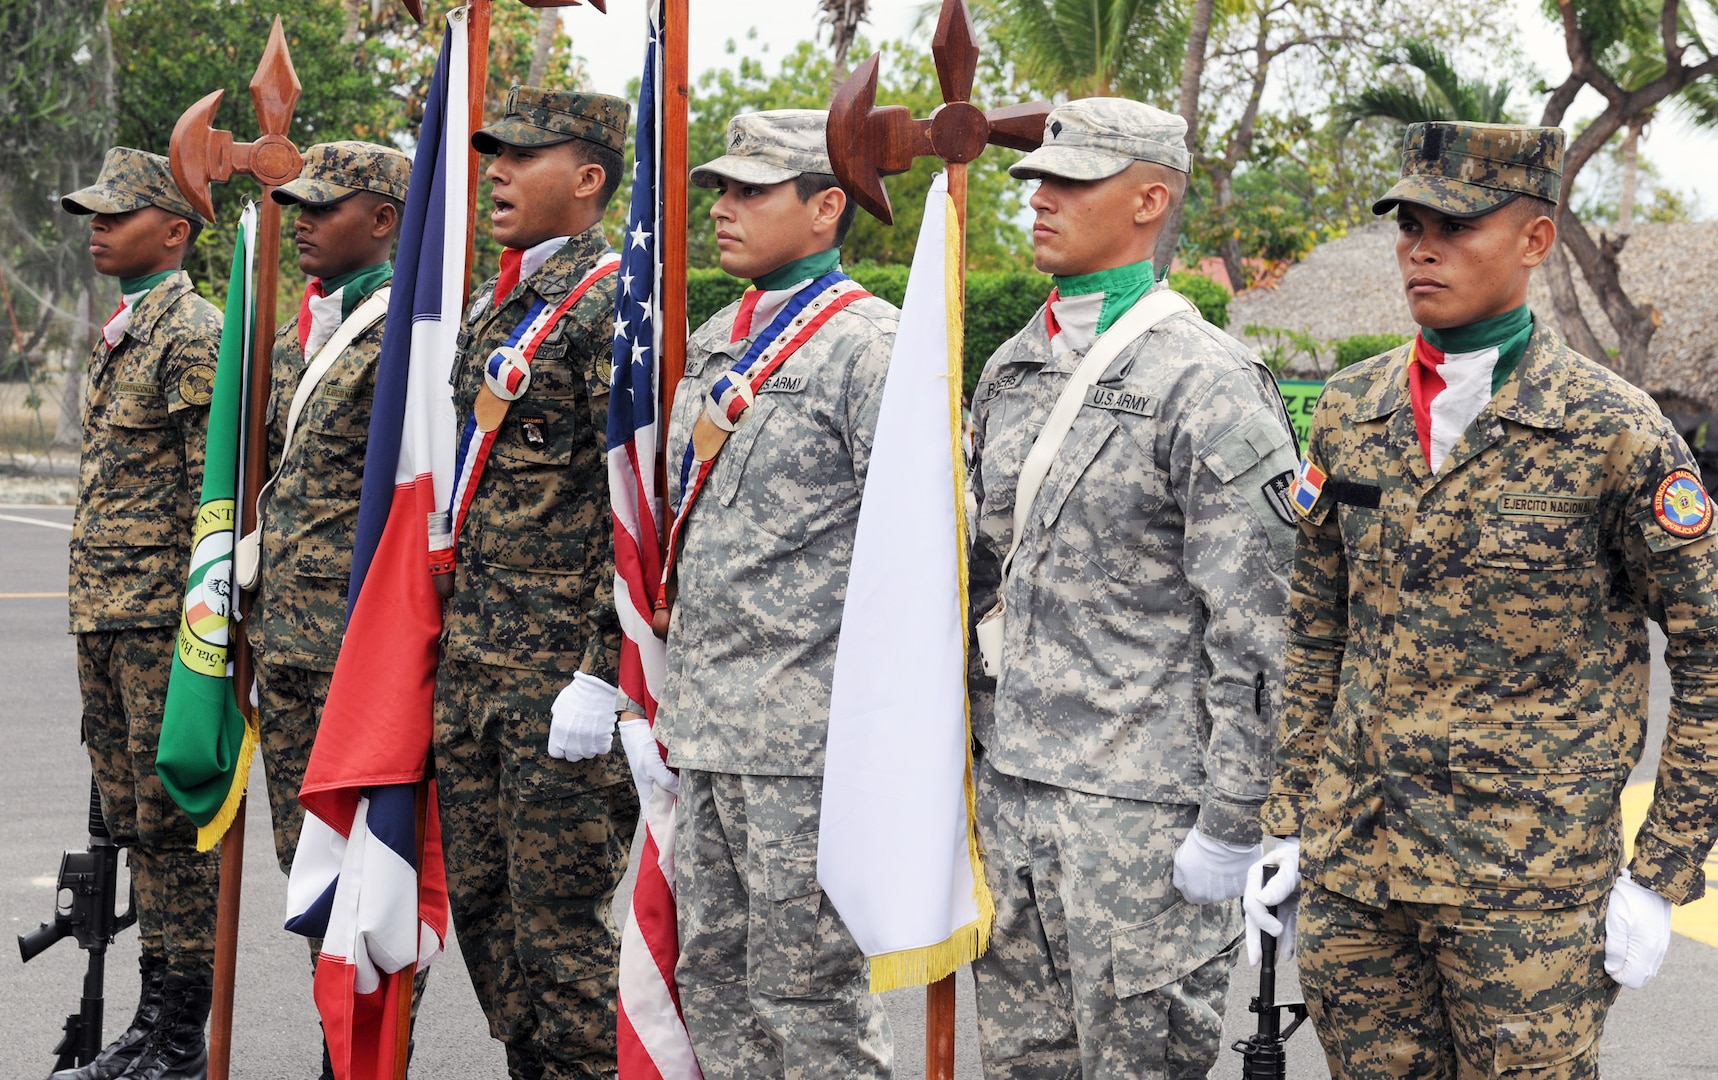 U.S. and Dominican Soldiers stand side-by-side May 6 during the opening ceremony for Beyond the Horizon-Dominican Republic 2014.
BTH 2014 is an exercise deploying U.S. military engineers and medical professionals to Guatemala and the Dominican Republic for
training, while providing services to rural communities.
Photo by Robert R. Ramon